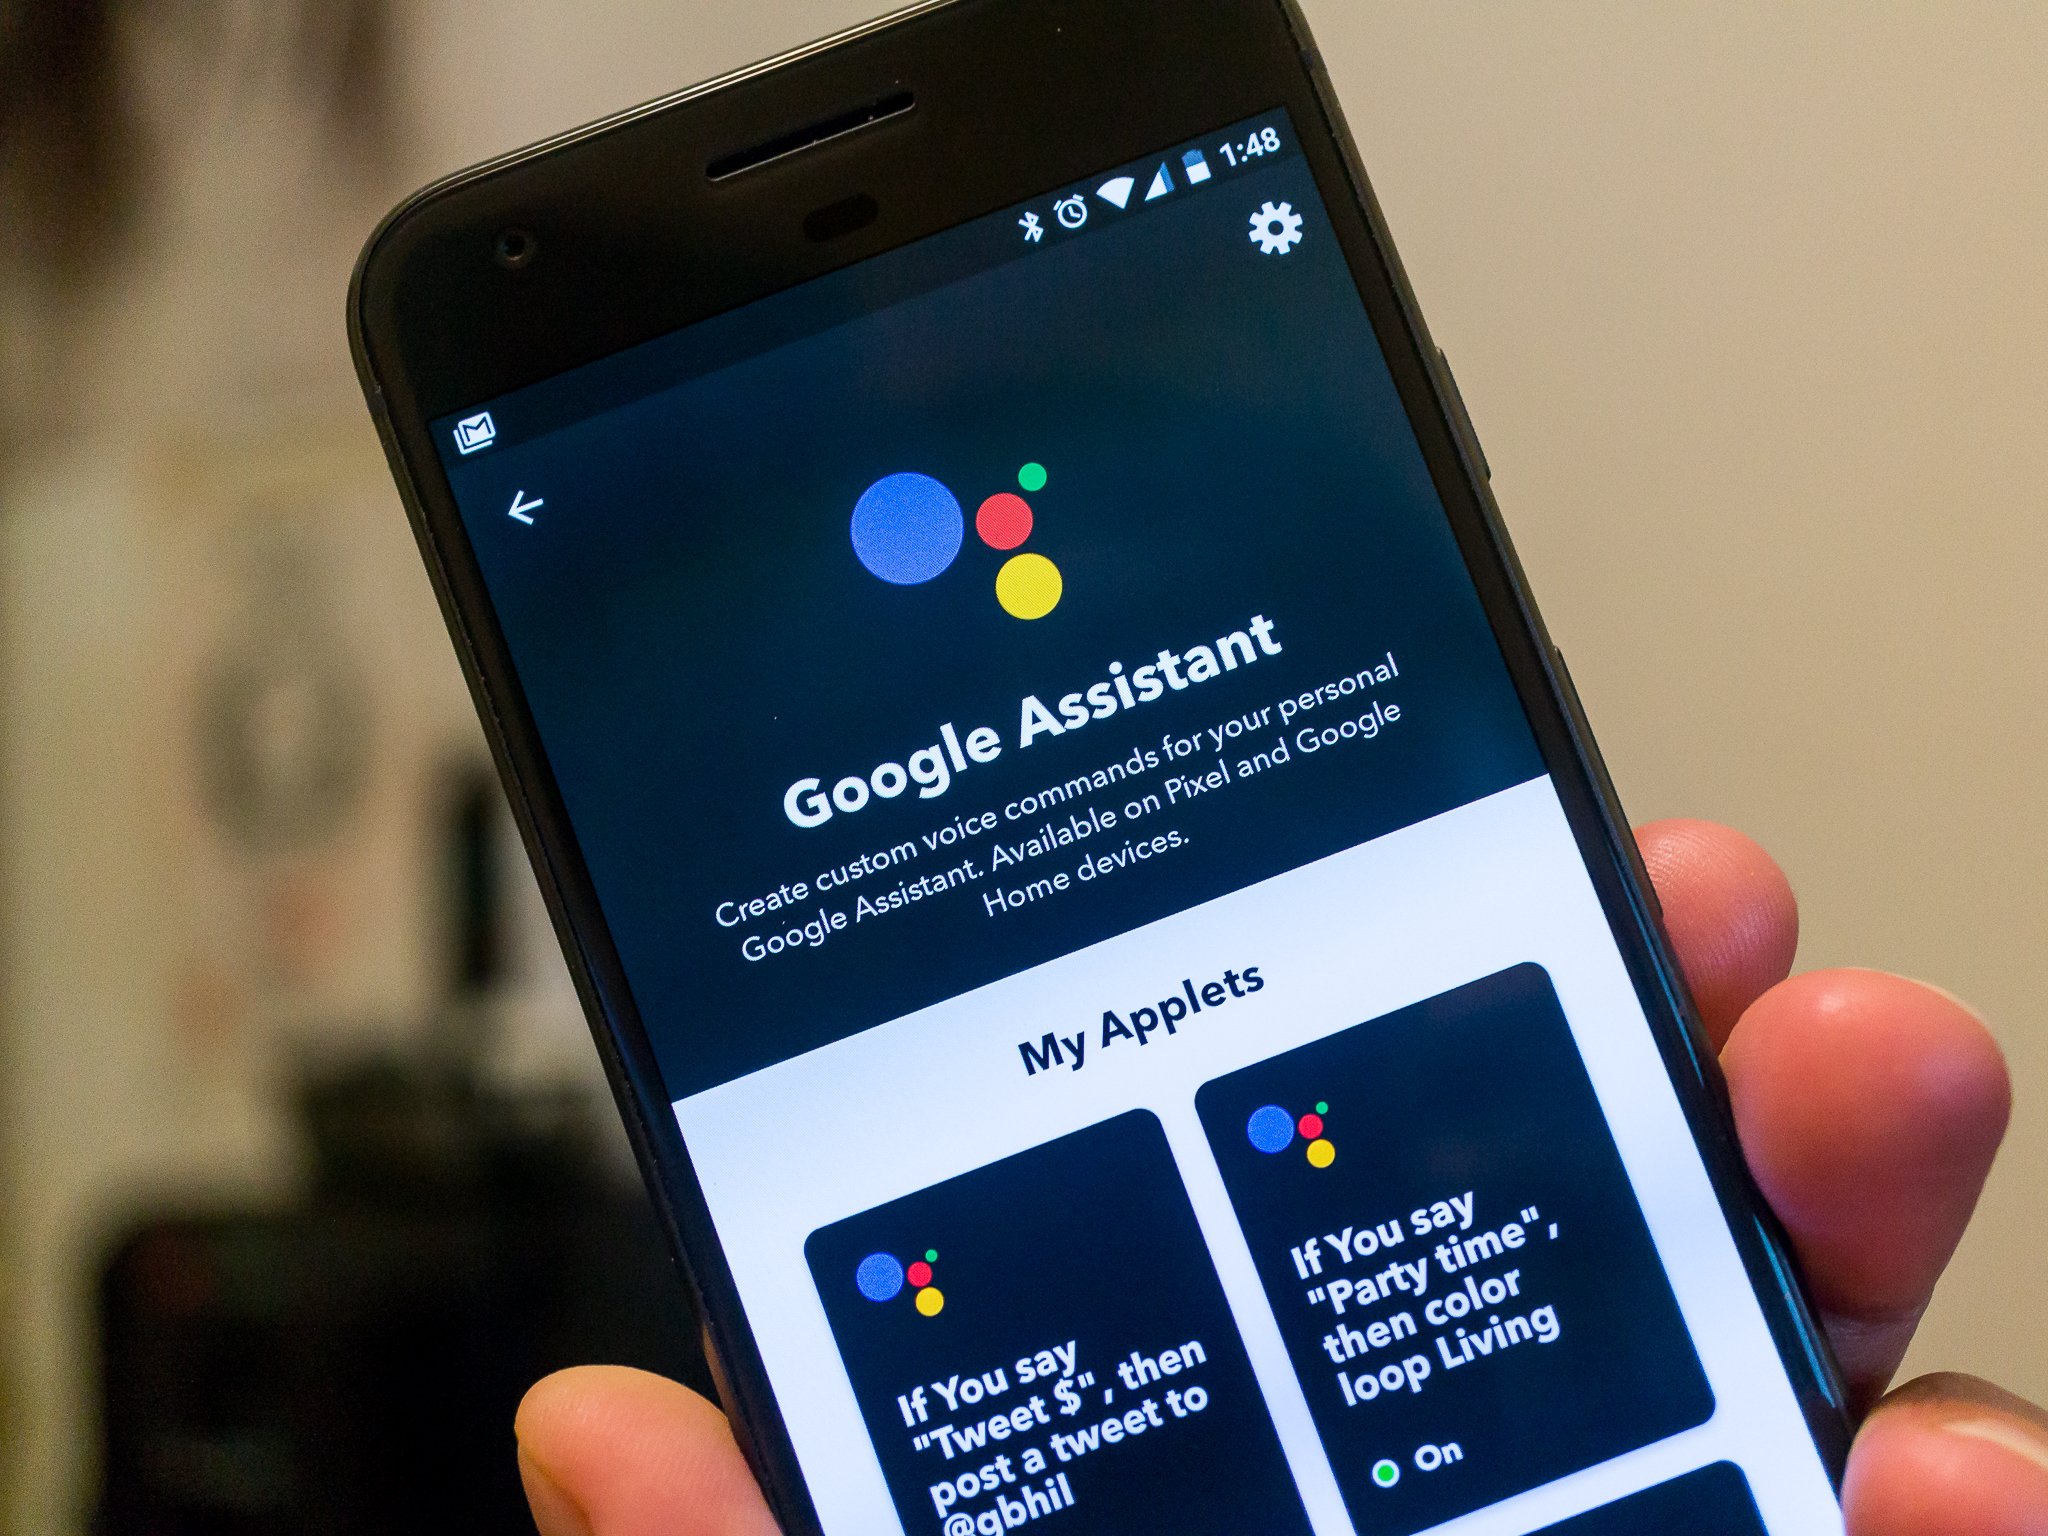 Google Assistant and IFTTT